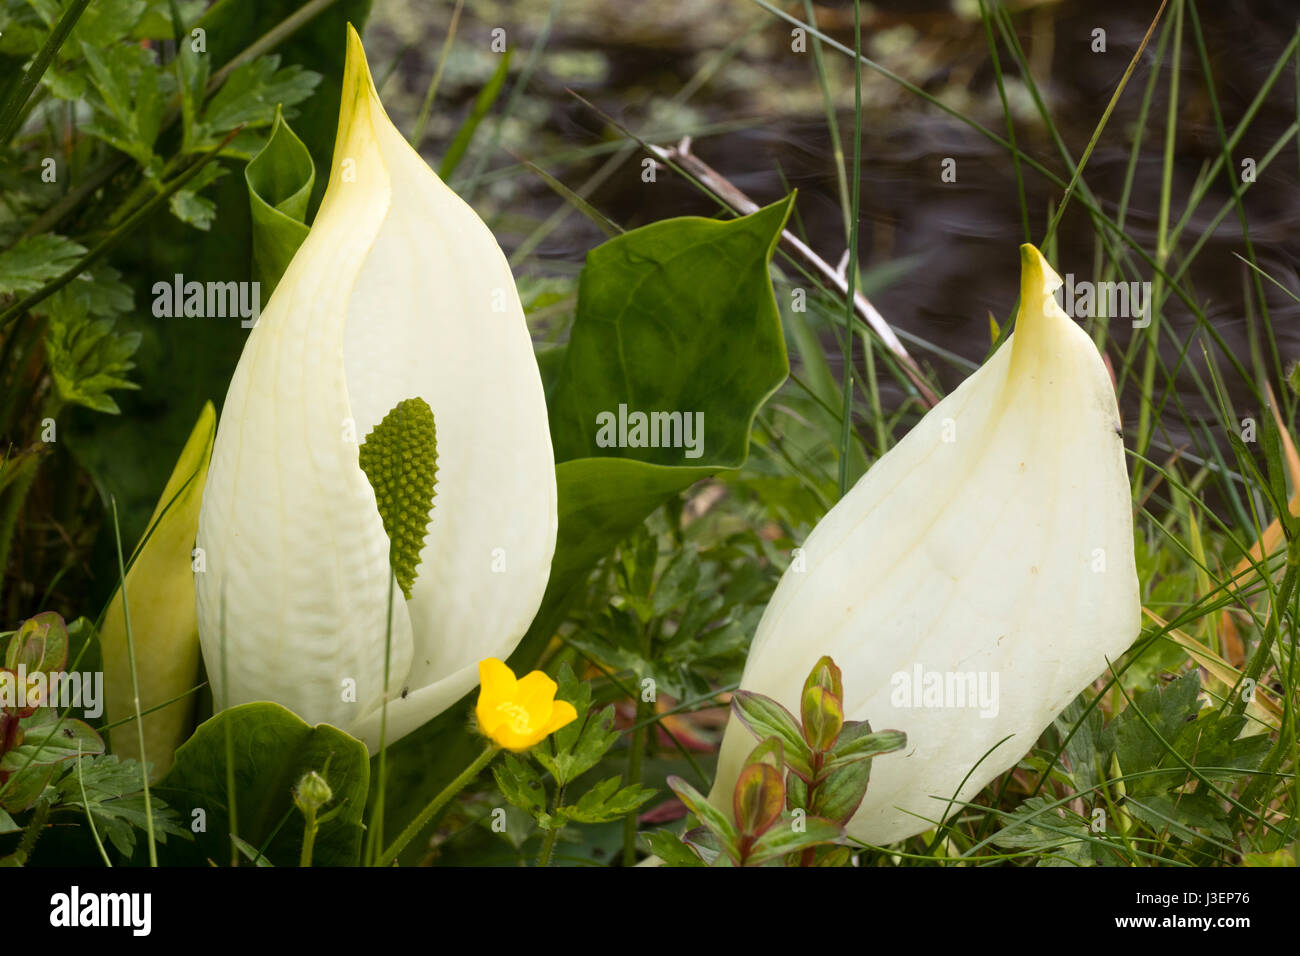 White spring spathes of the Asian skunk cabbage, Lysichiton camtschatcensis, by the water's edge Stock Photo